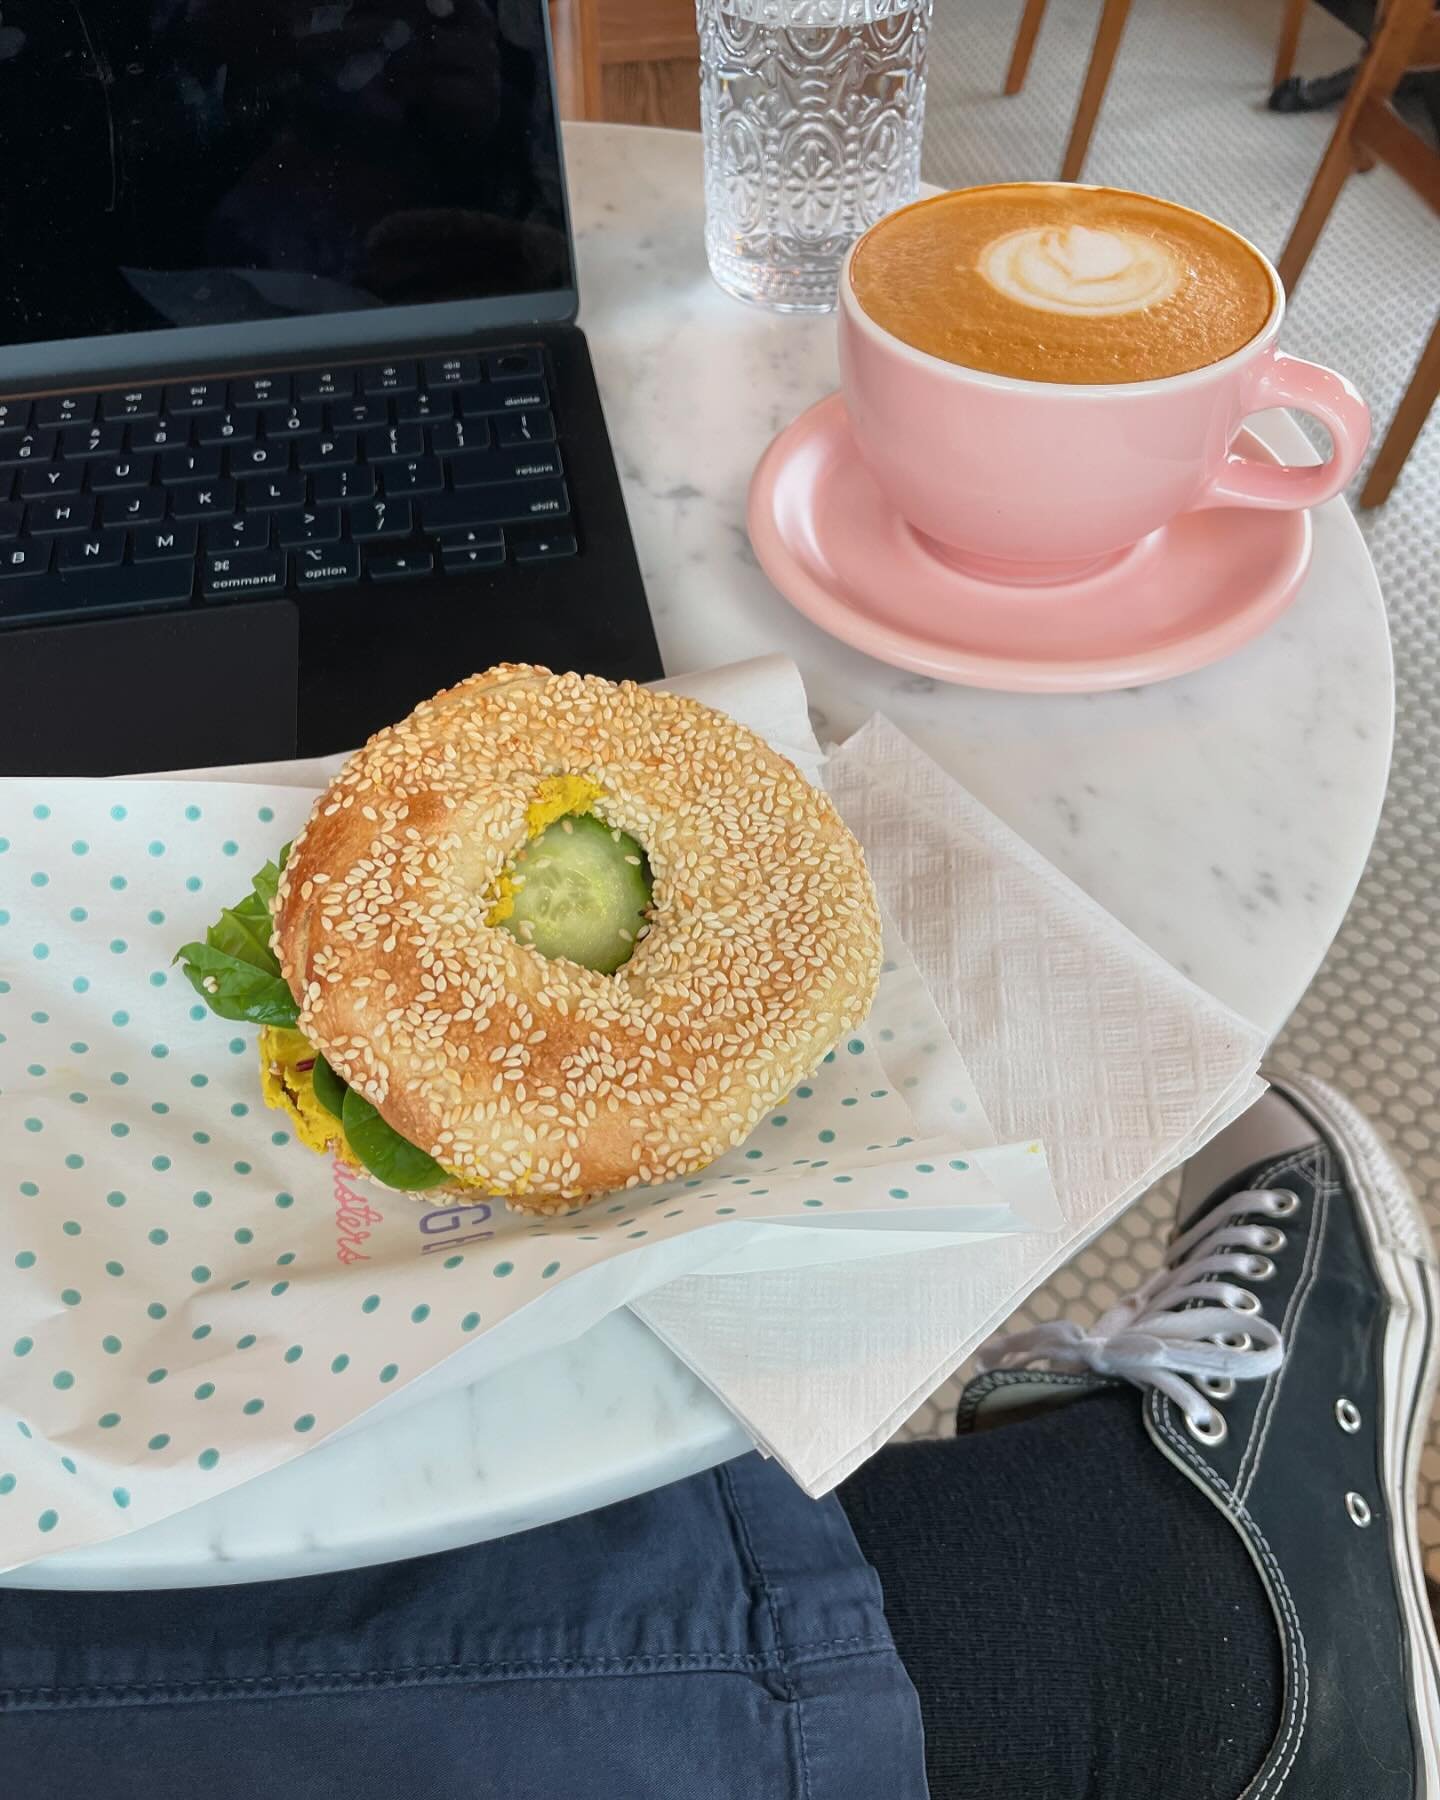 When everyone read the article you read about the lovely new @vincenzosmercato.wpg so you have lunch at @thombargen&rsquo;s lovely new location instead. 💻 ☕️ 🥯 😍